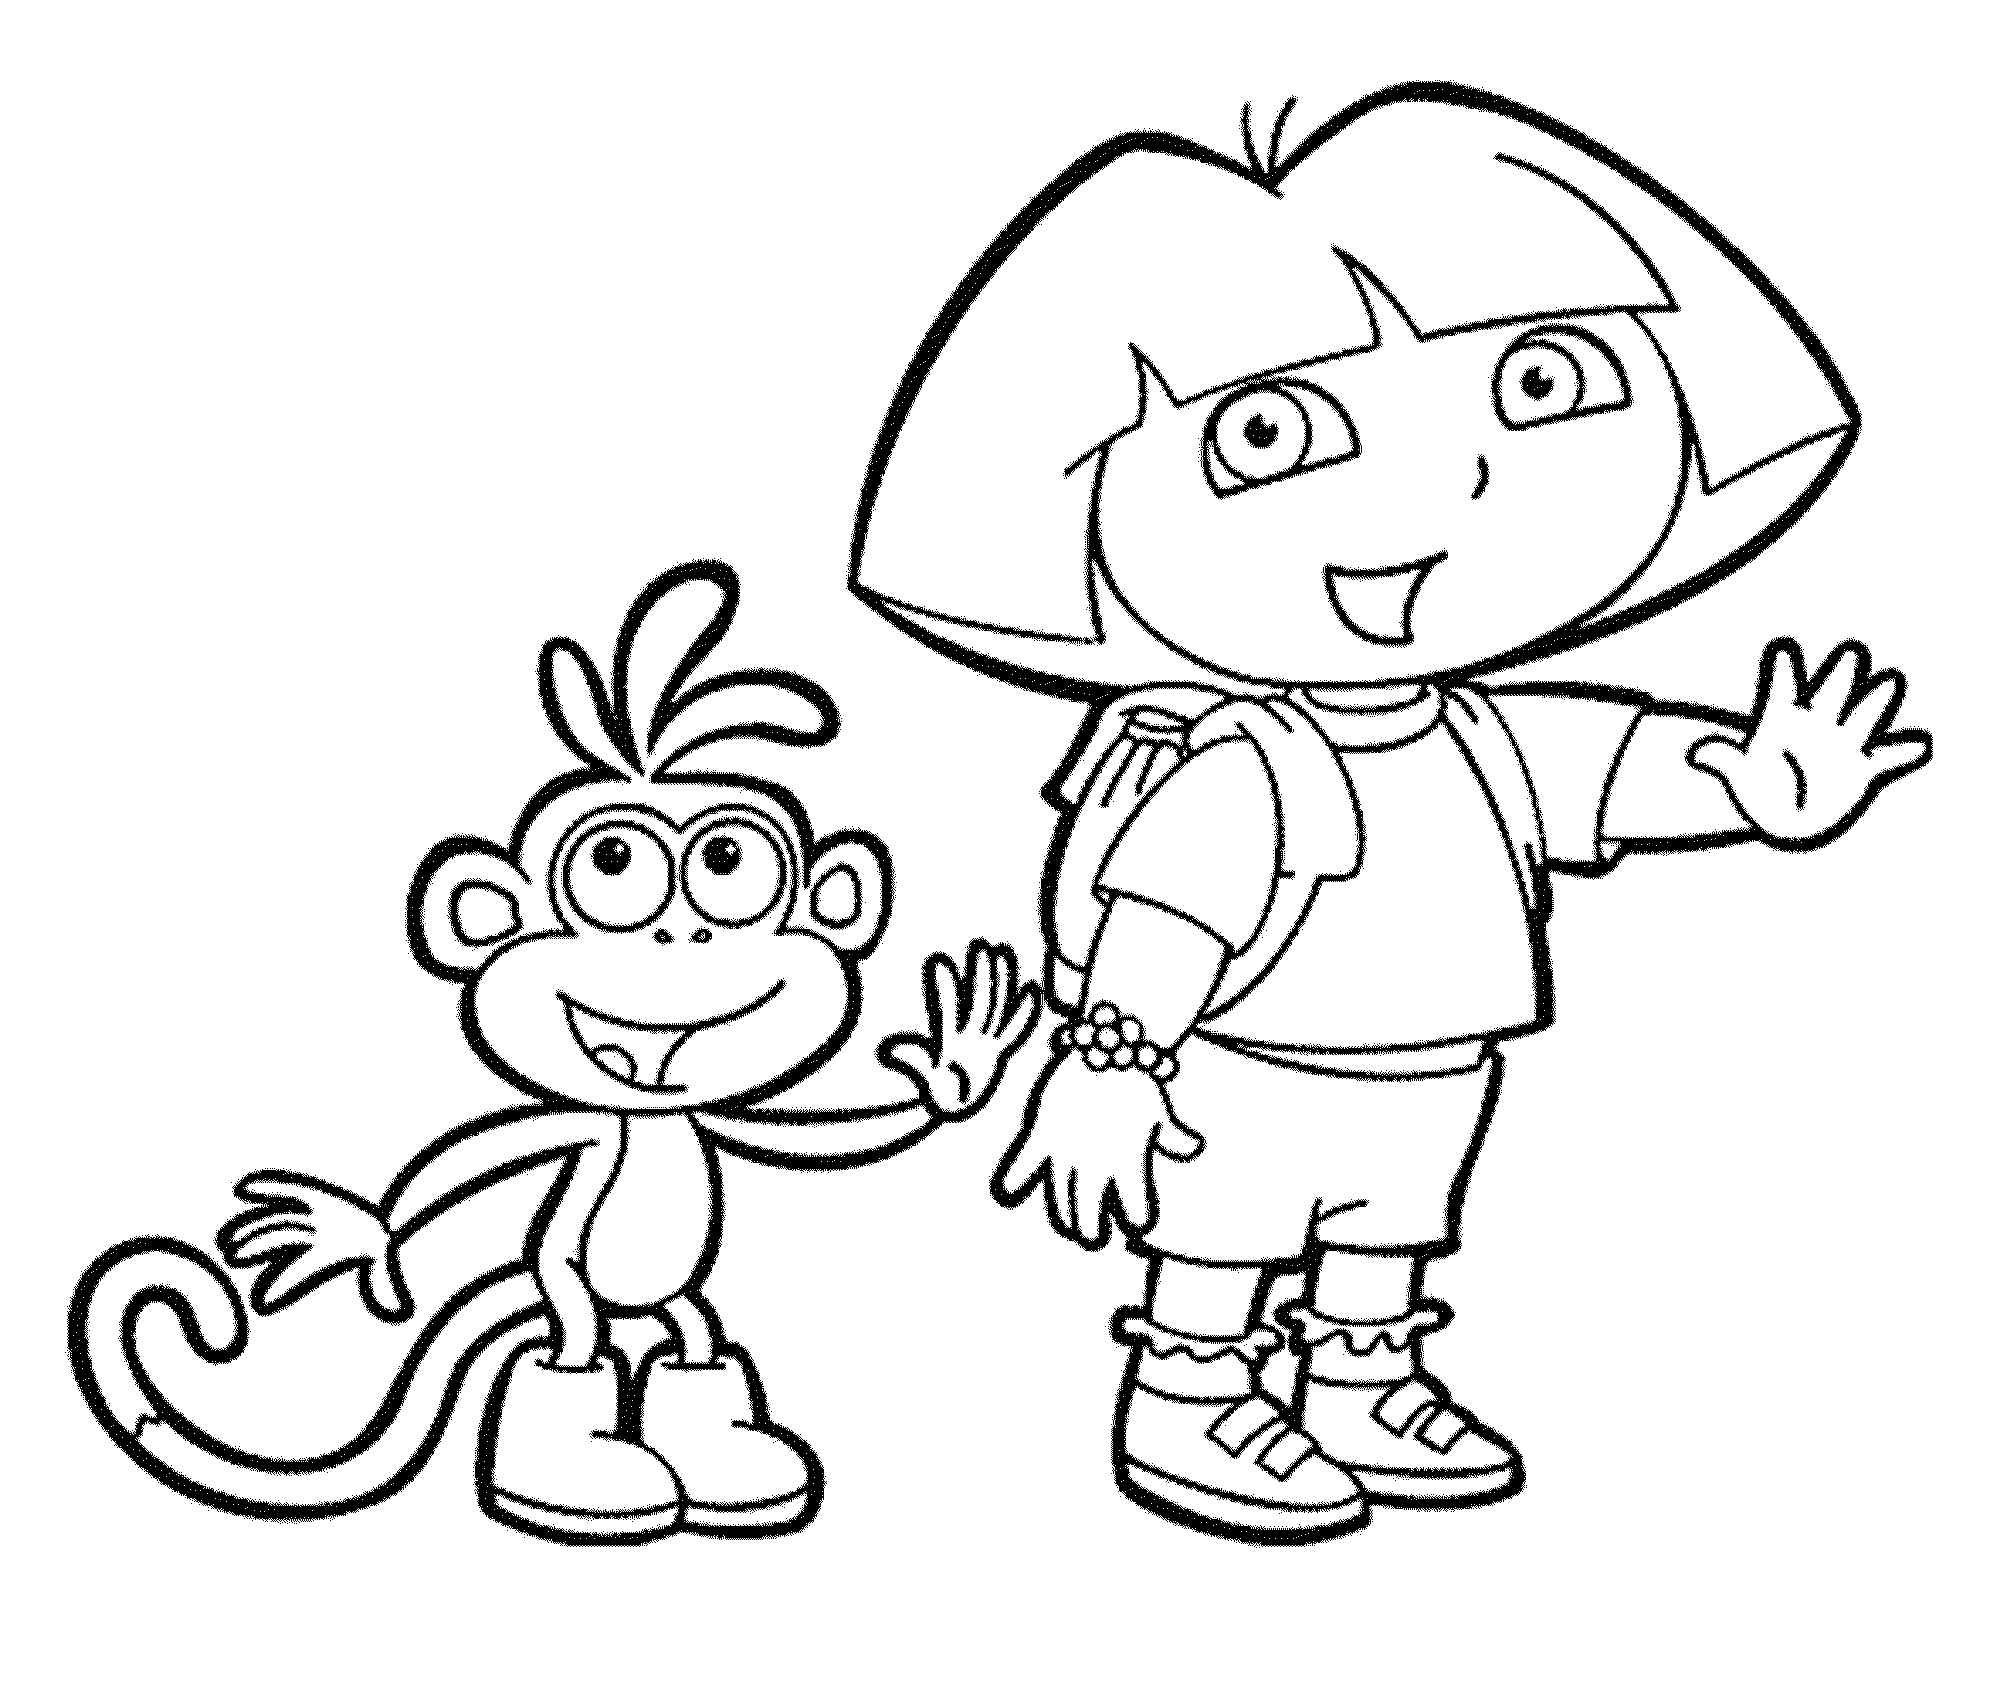 Print & Download Dora Coloring Pages to Learn New Things